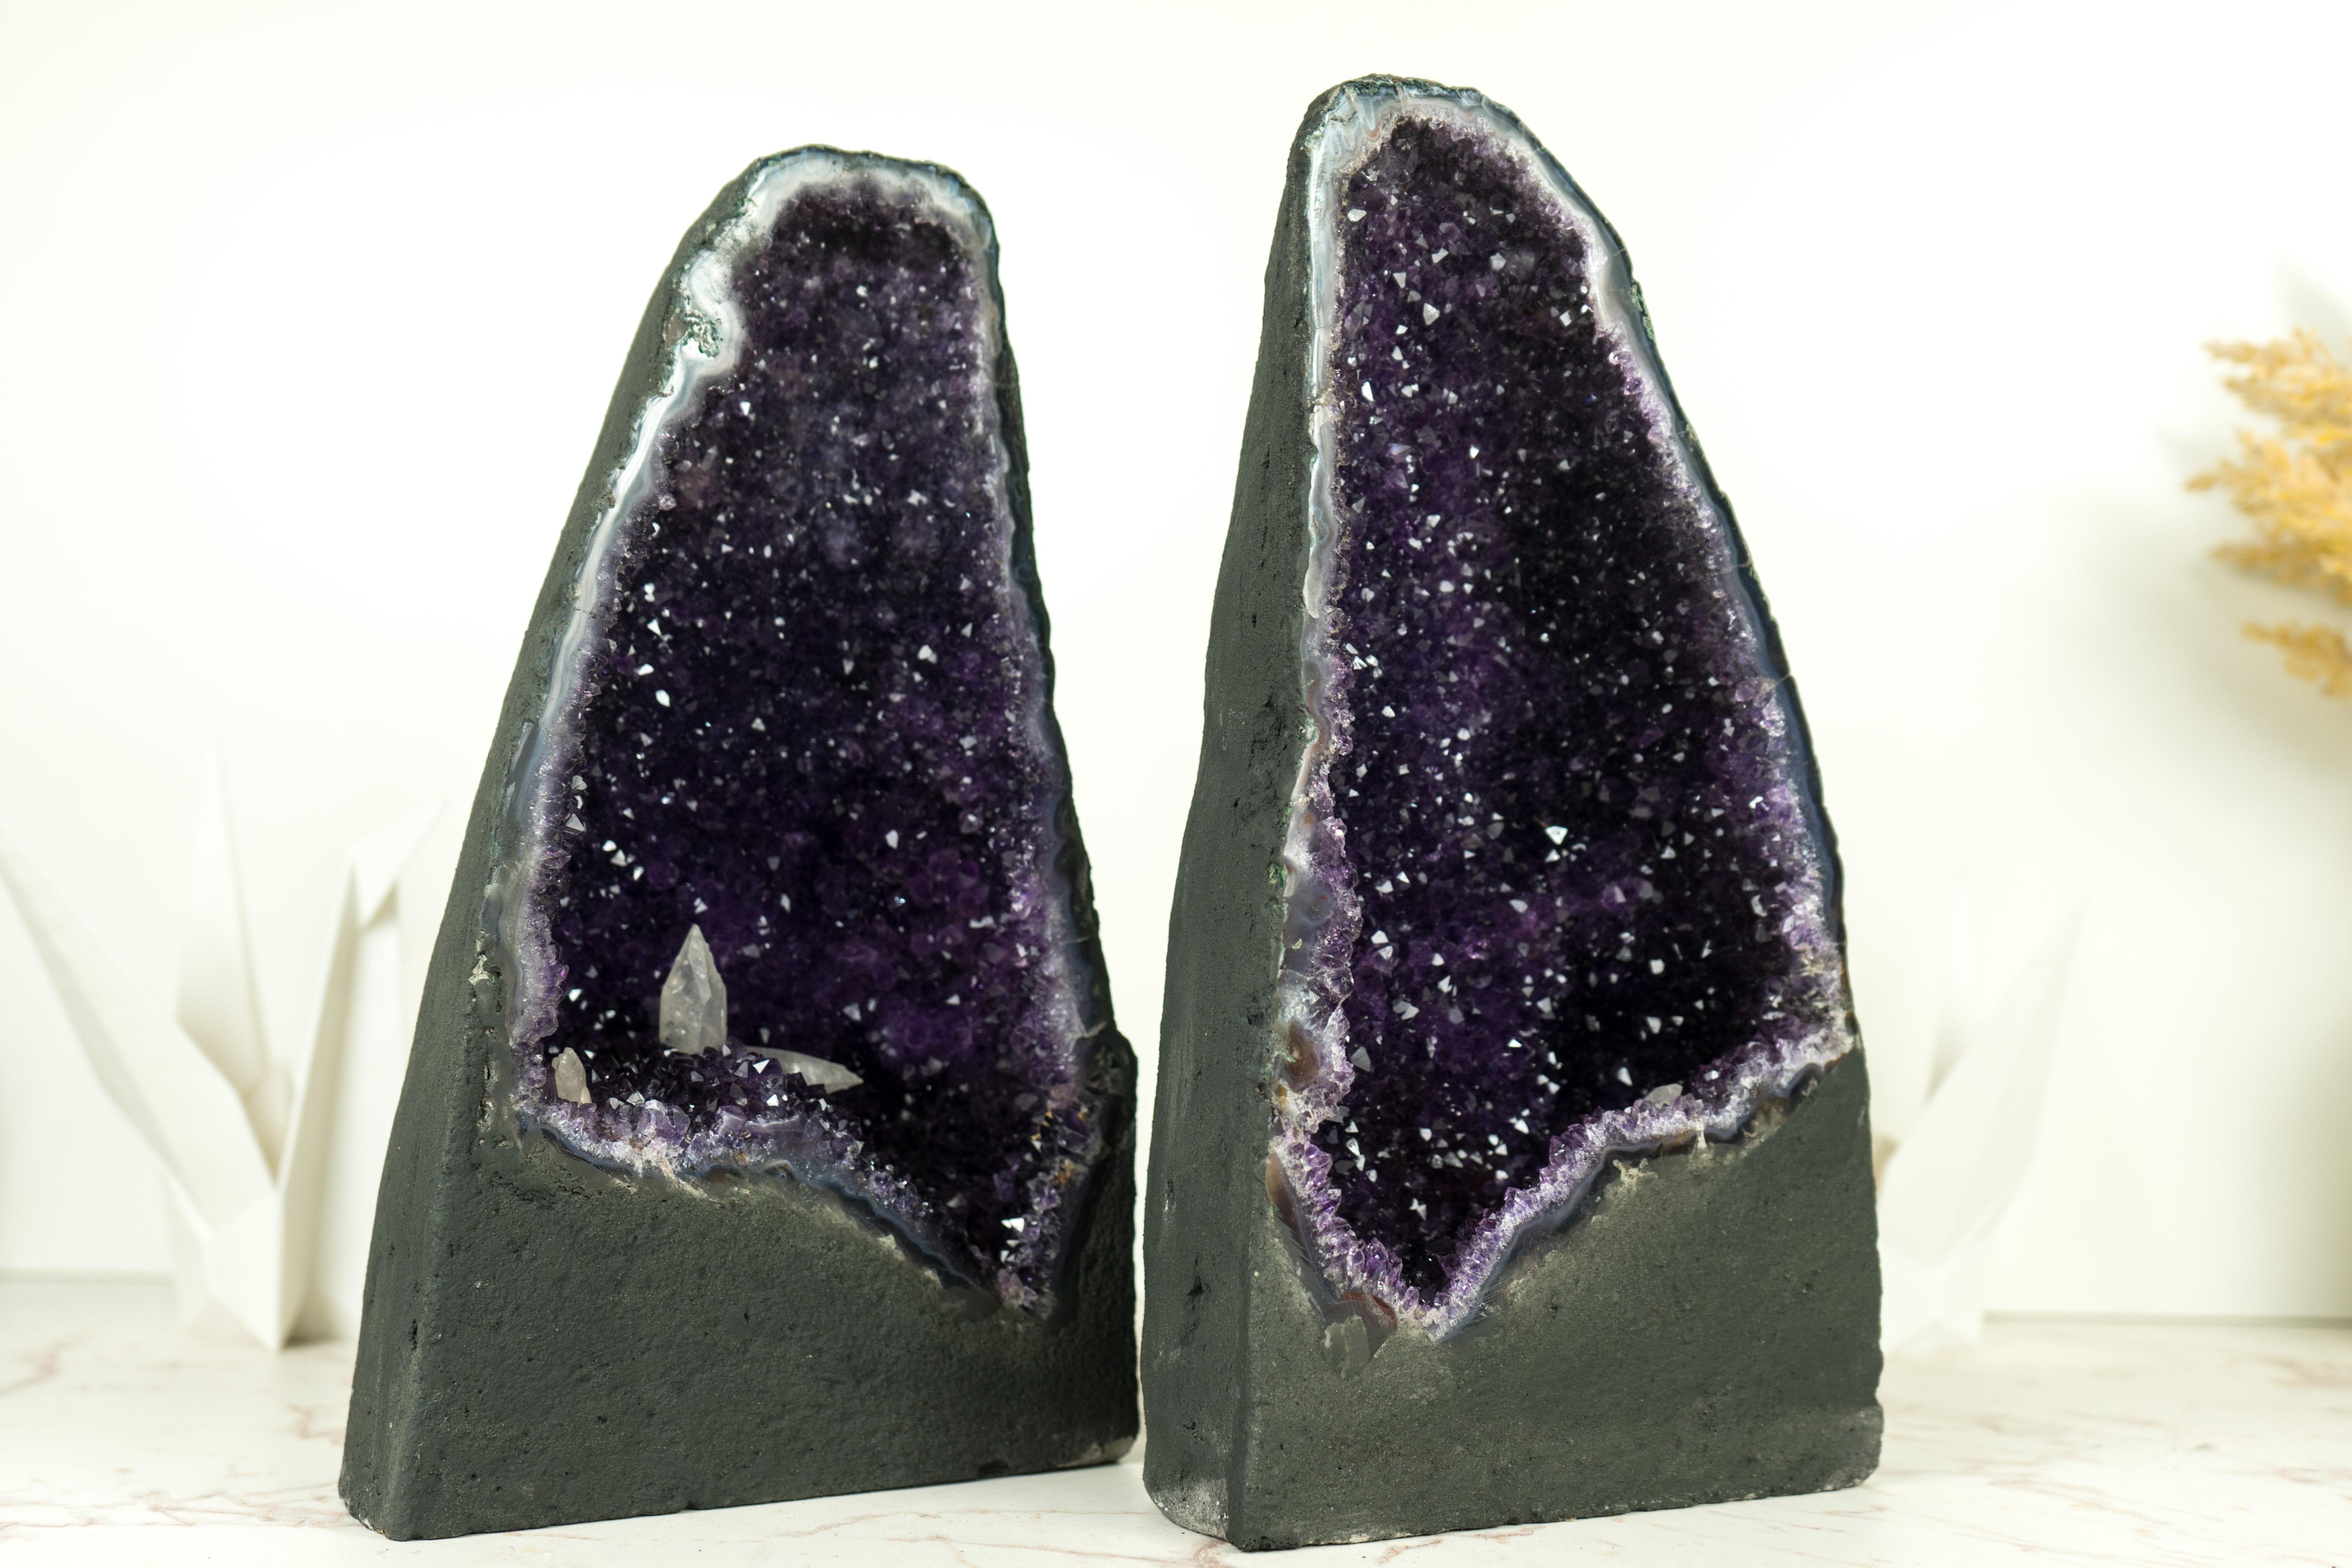 All-Natural Amethyst Geodes with Intact Calcite and Rich Purple Galaxy Amethyst  1